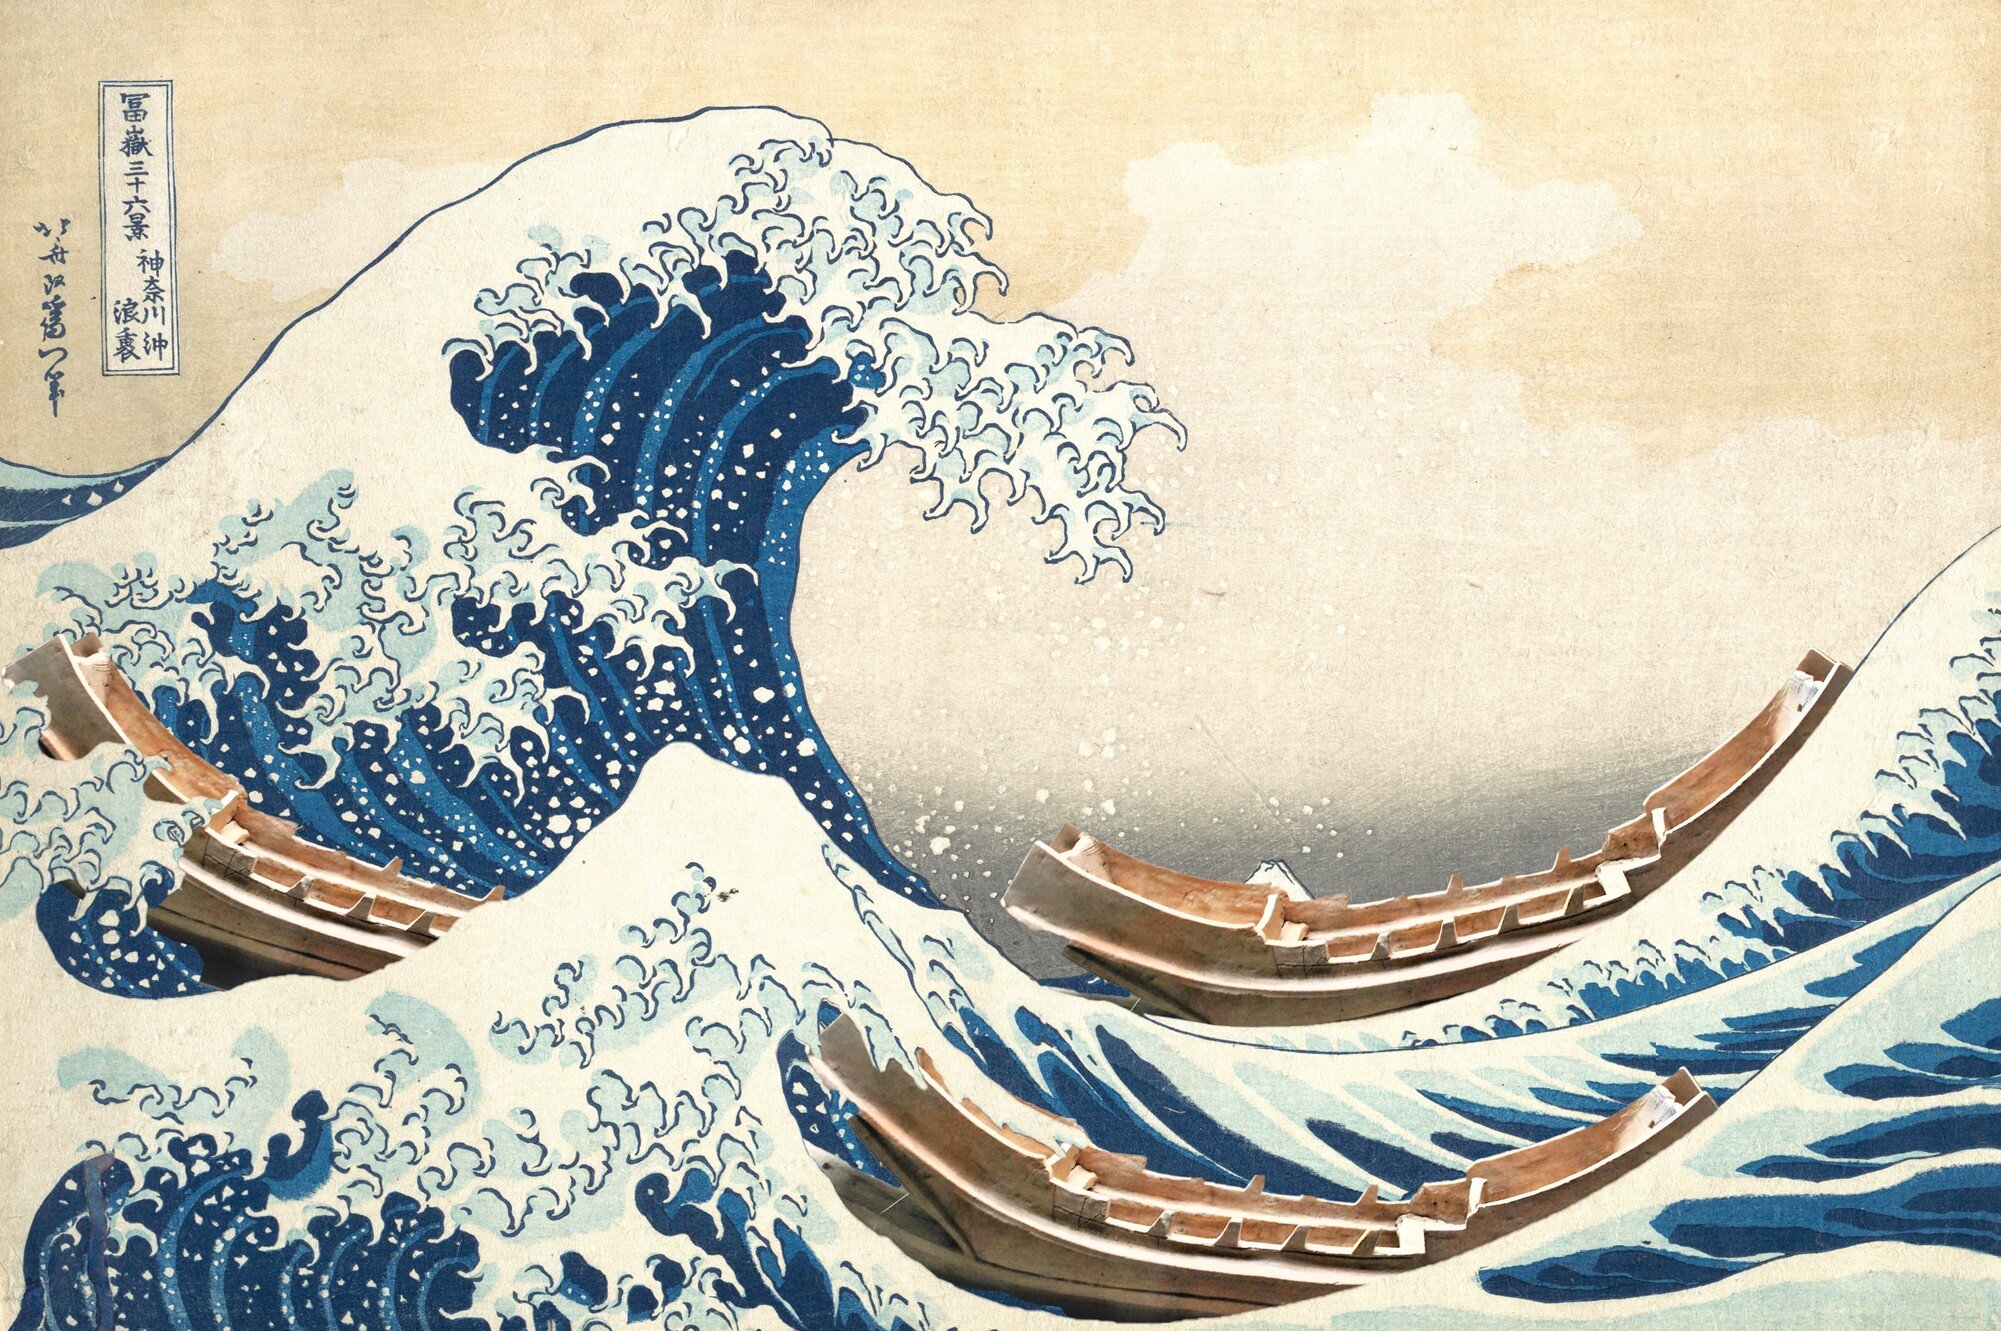 Hokusai's painting, the Great Wave, but the ships are replaced by haniwa boats